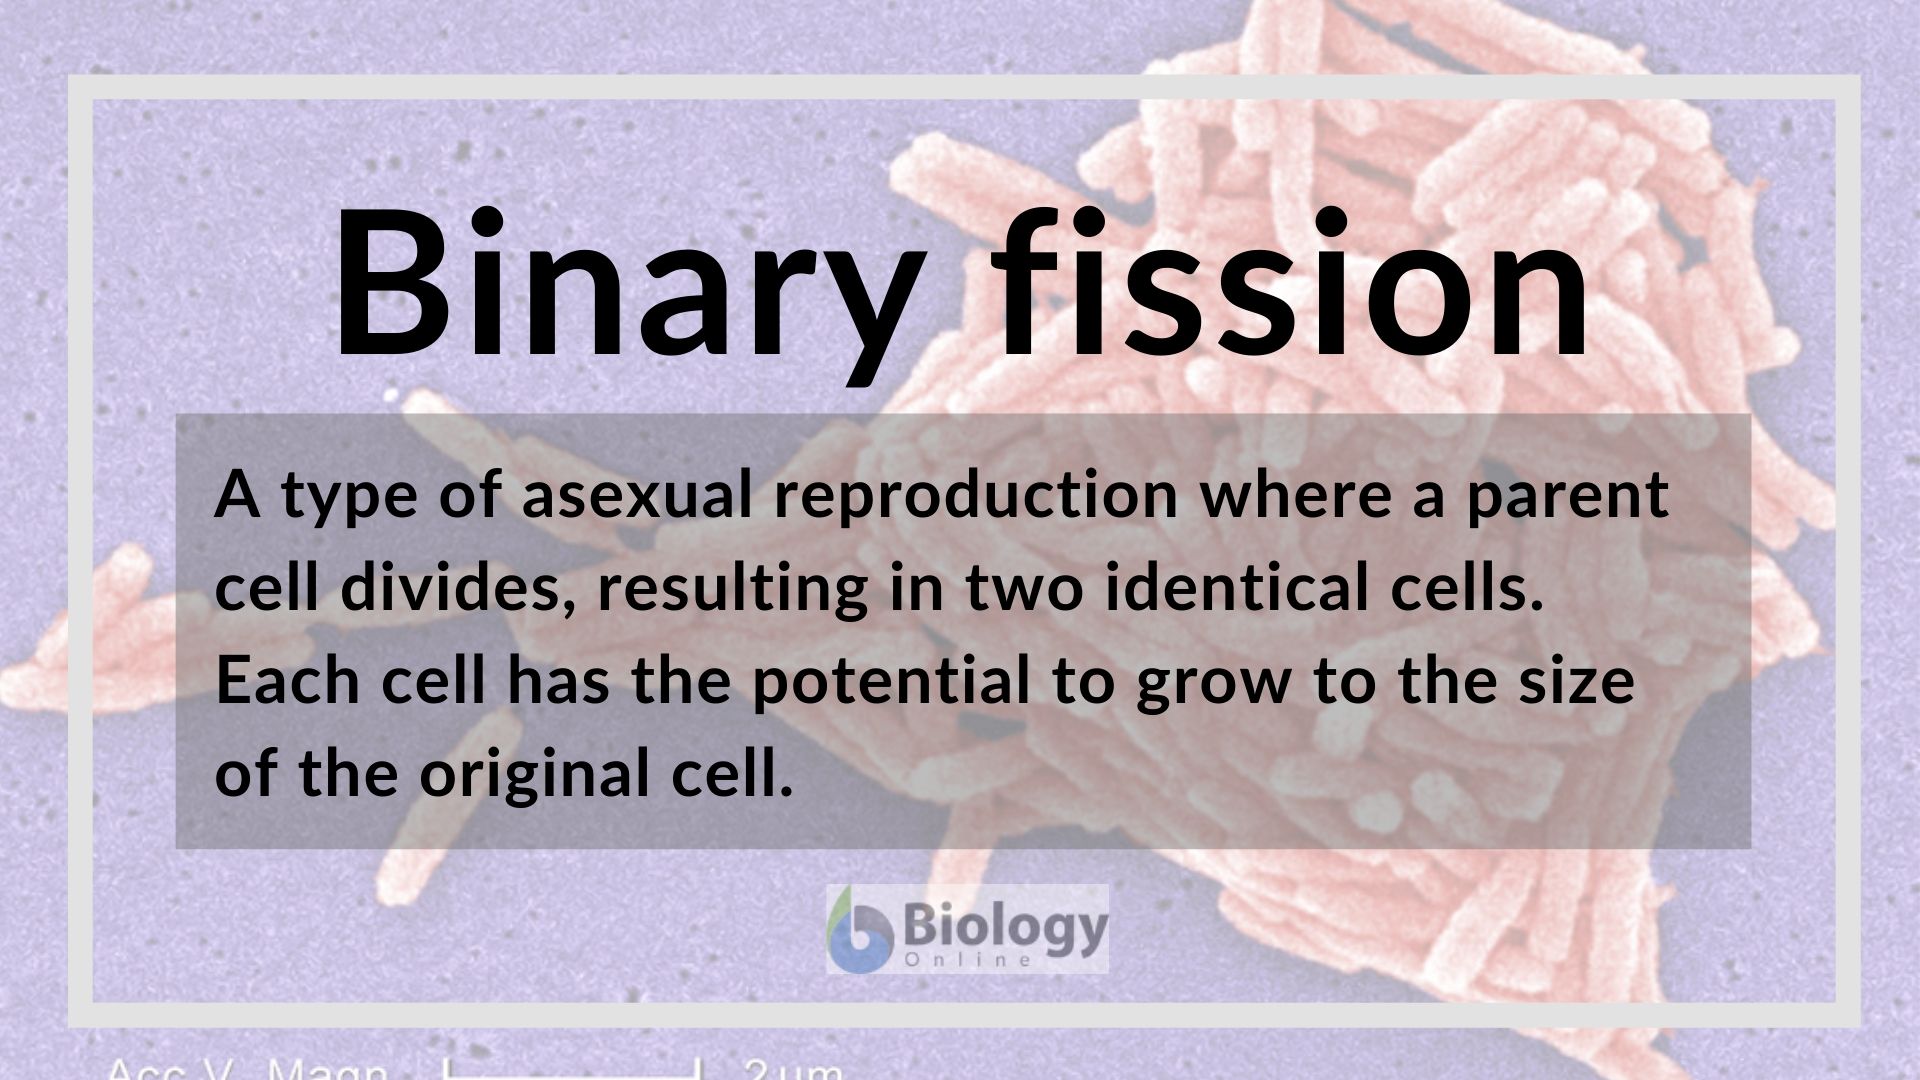 binary fission definition in biology